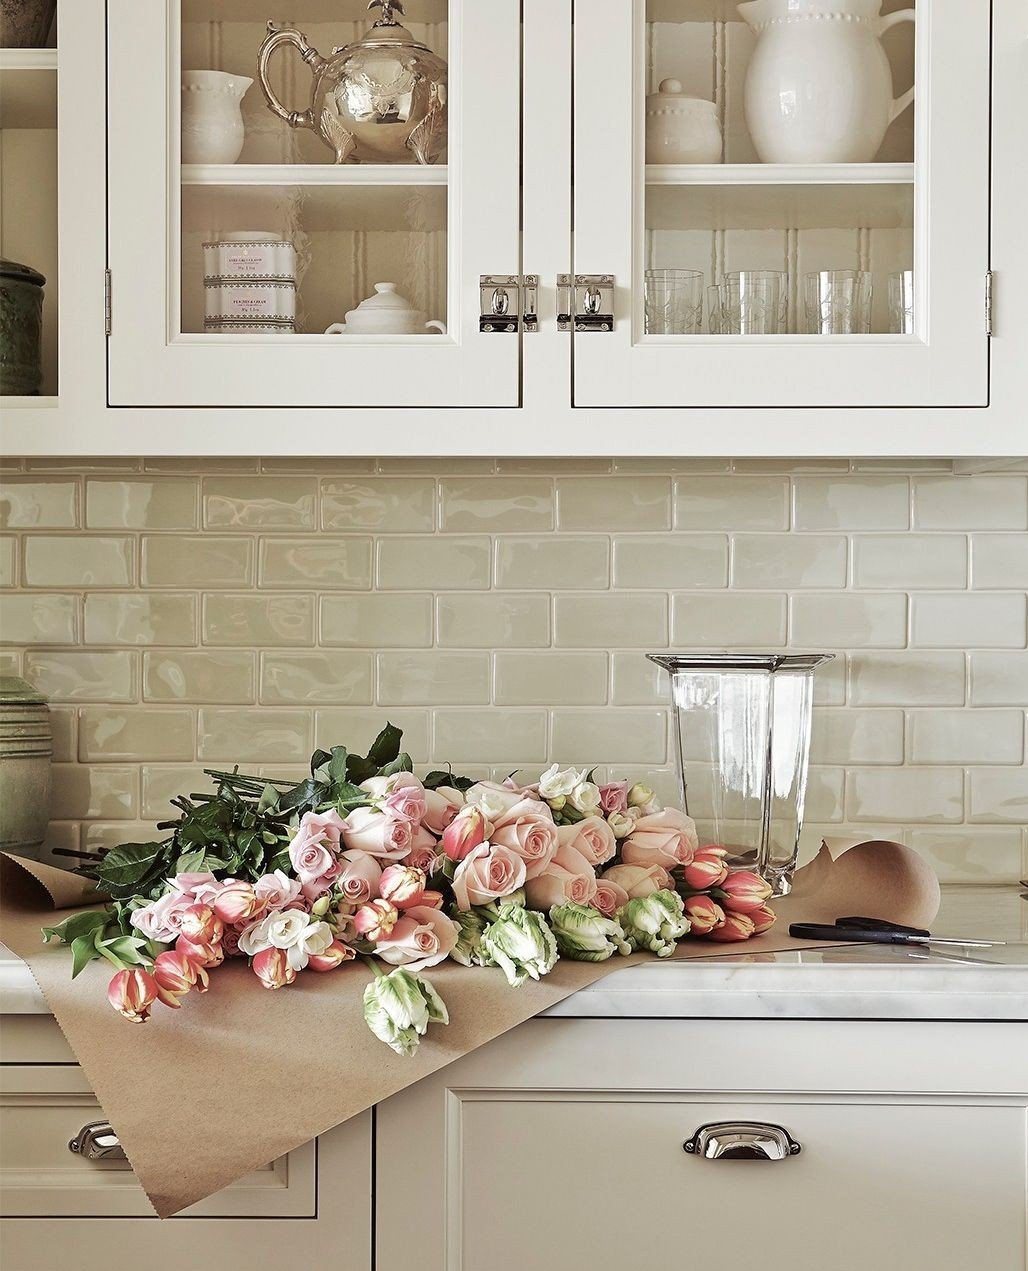 The sun is shining, the weather is warm and the flowers are staring to bloom. Feeling today like spring has sprung! ⁠
⁠
Kitchen design by @laurasteininteriors⁠
Photo by @davidbagosy